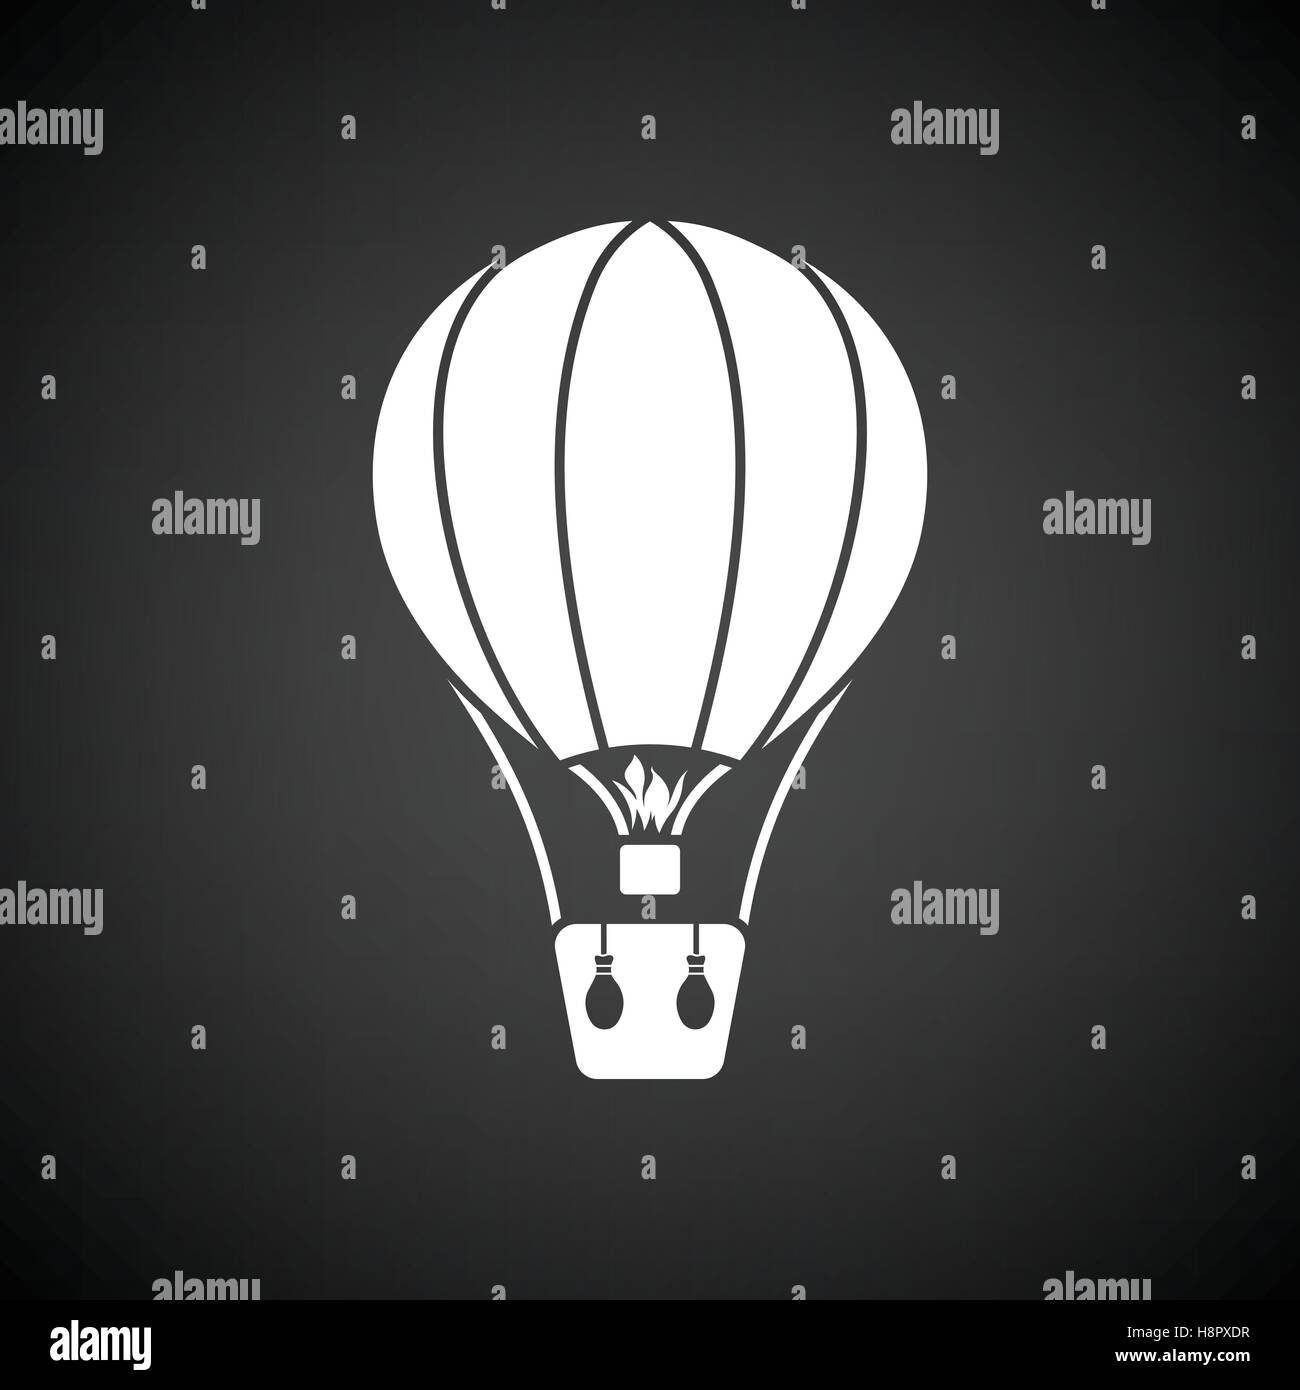 Hot air balloon icon. Black background with white. Vector illustration. Stock Vector